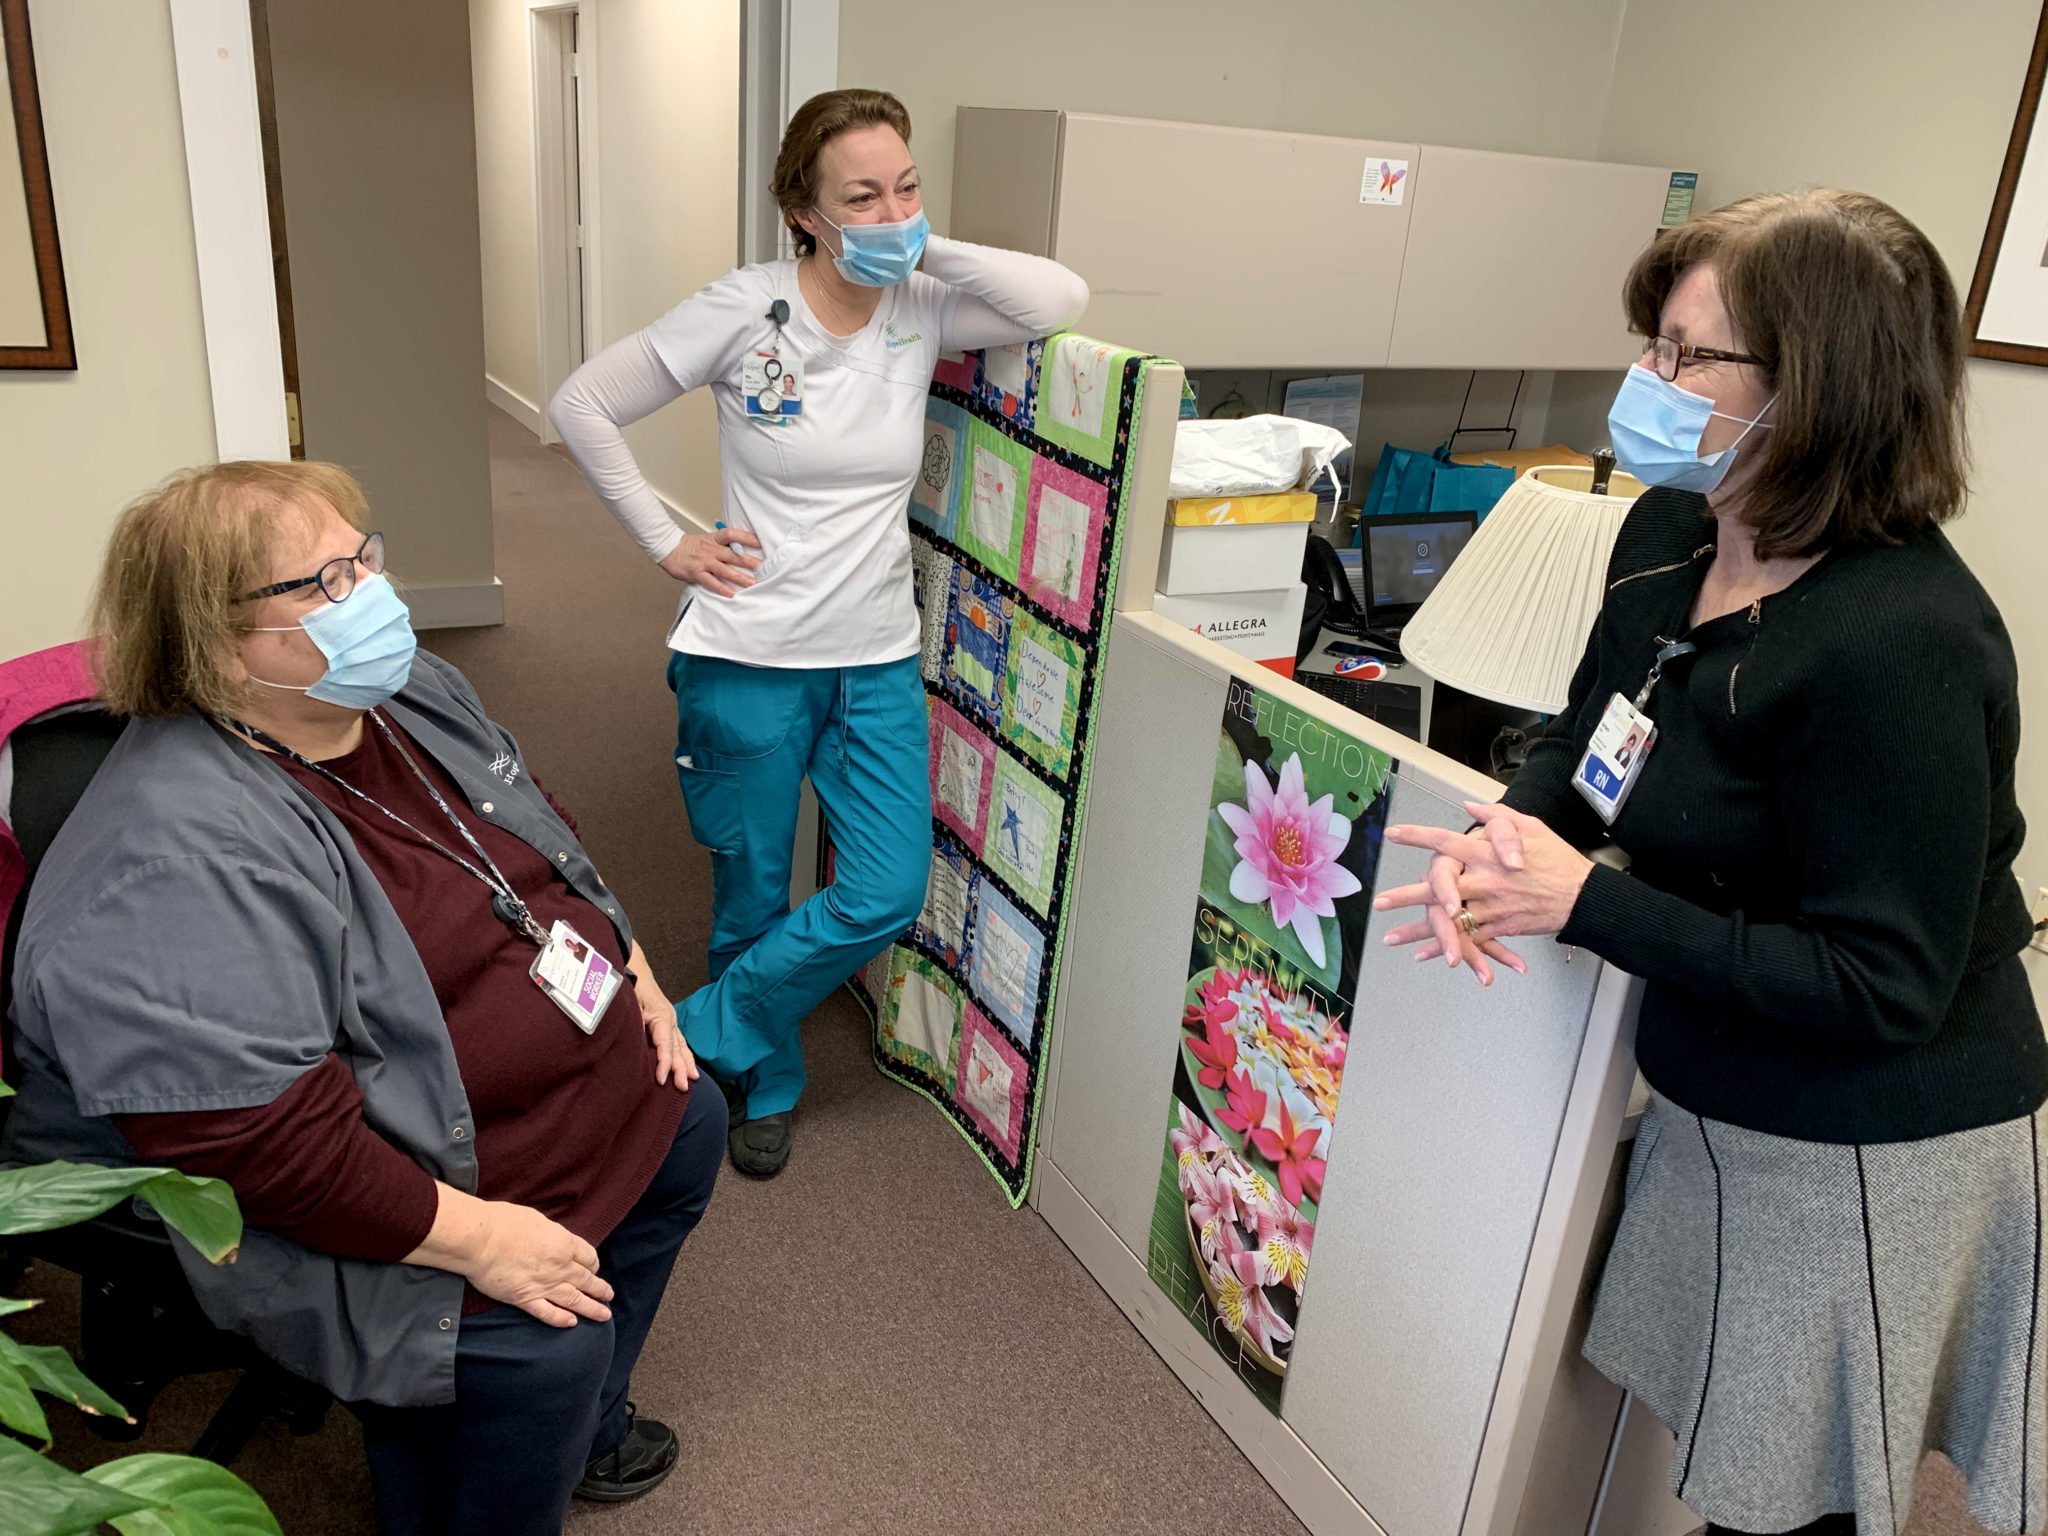 Hospice social worker chats with co-workers at office